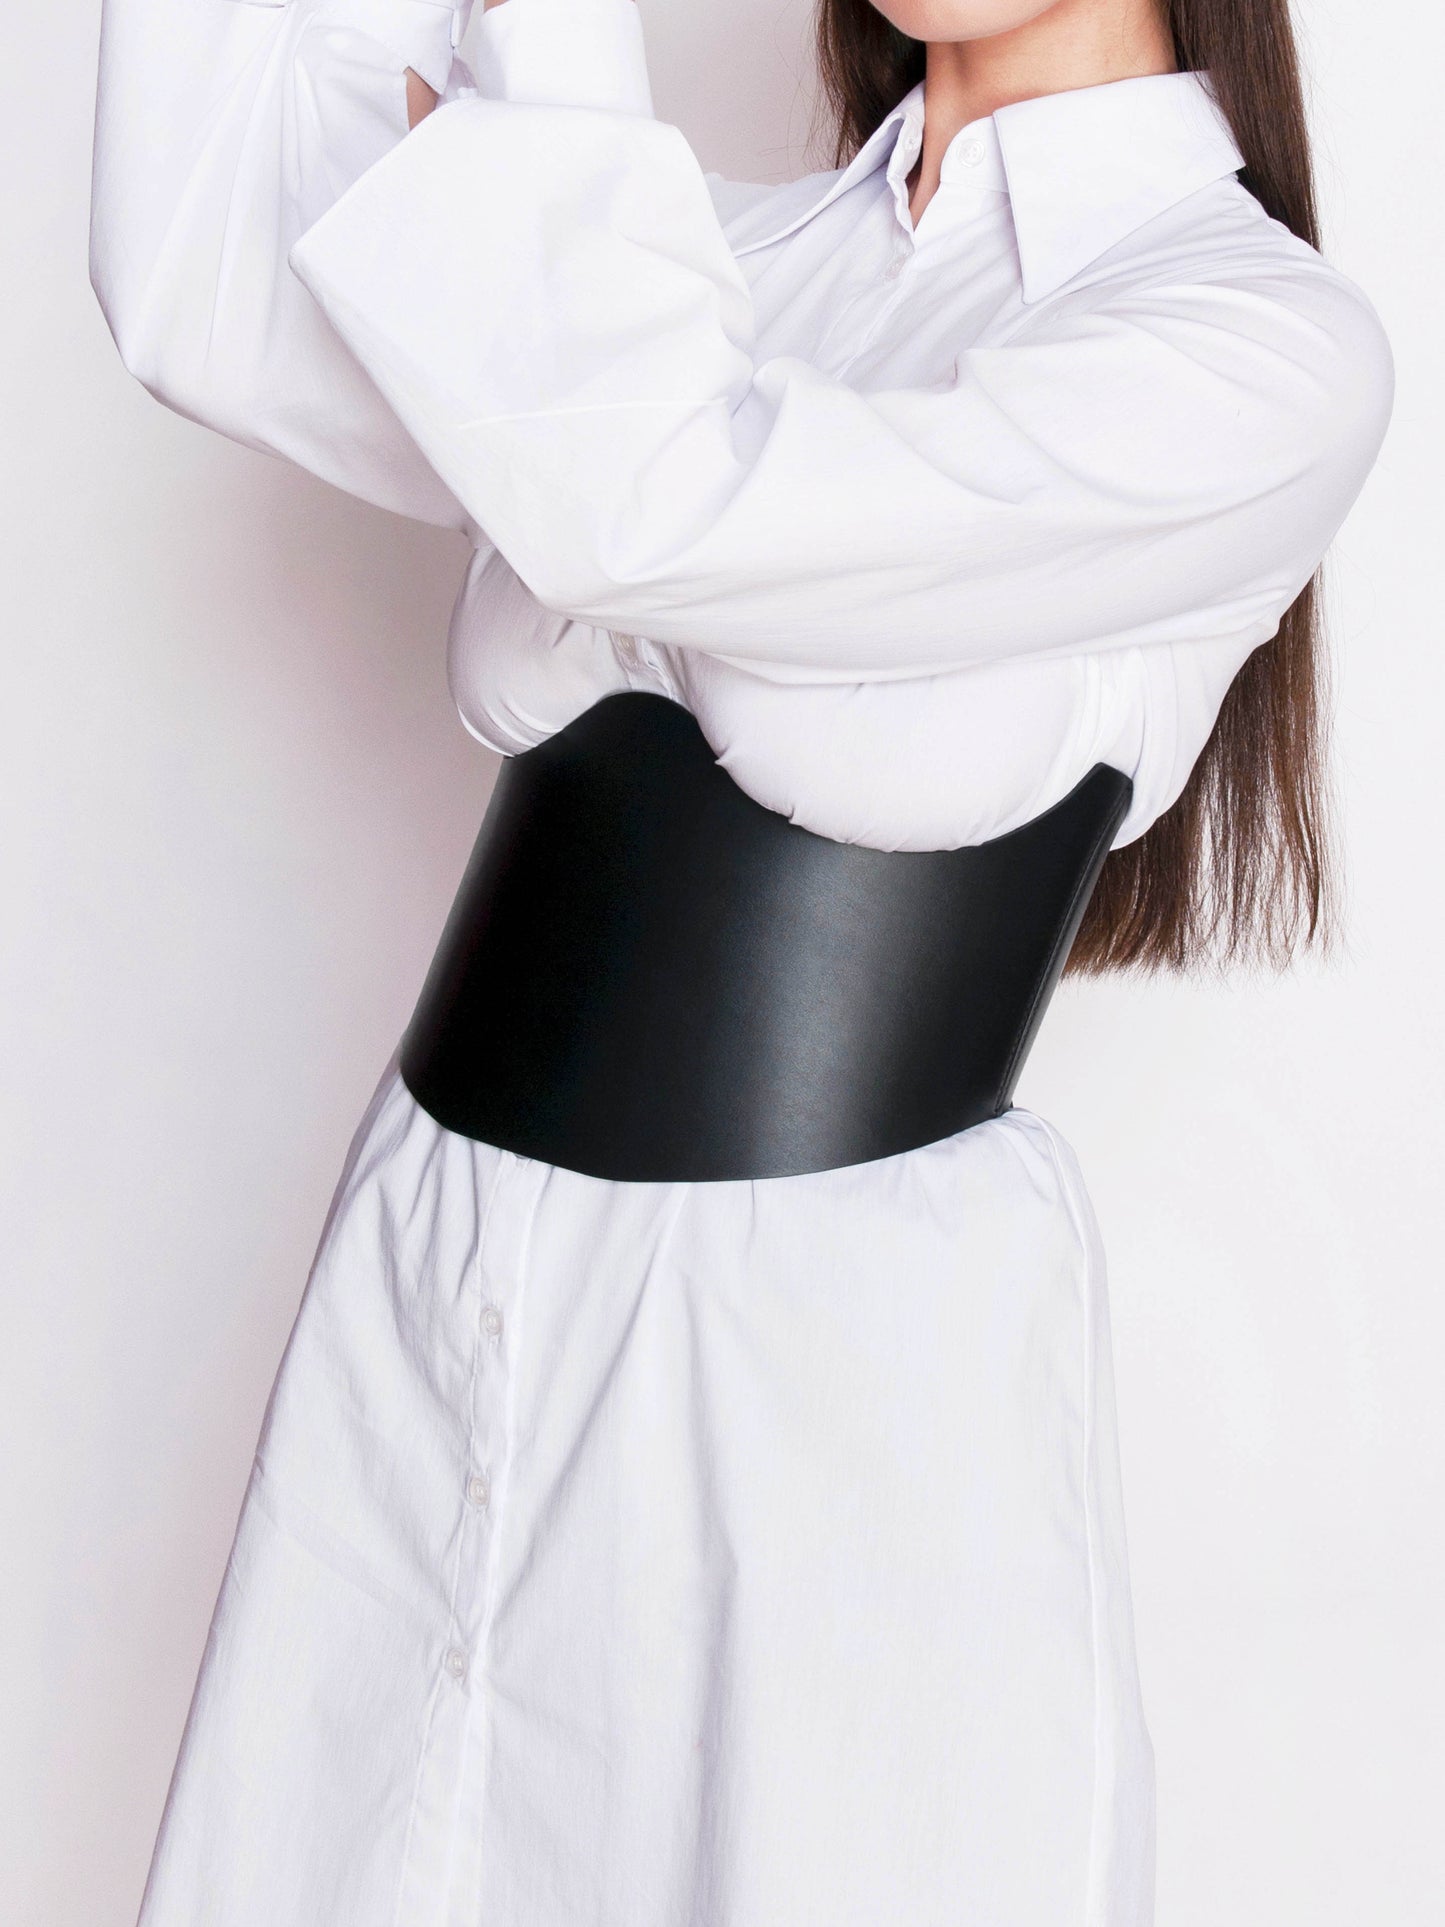 Side view of black underbust corset worn by woman over white shirt.